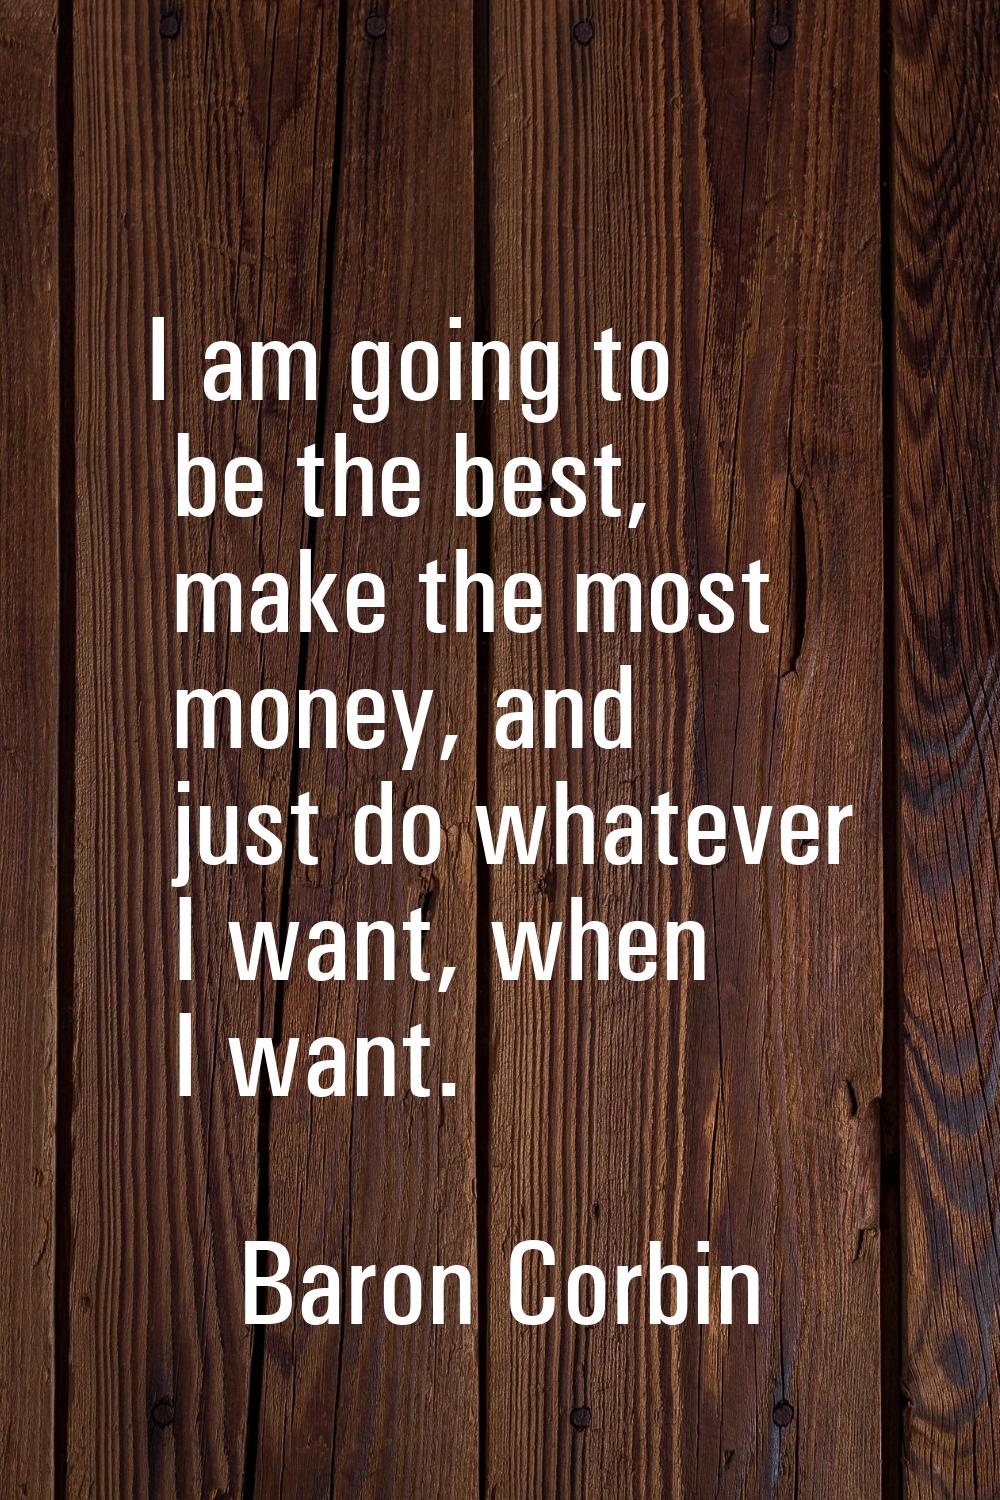 I am going to be the best, make the most money, and just do whatever I want, when I want.